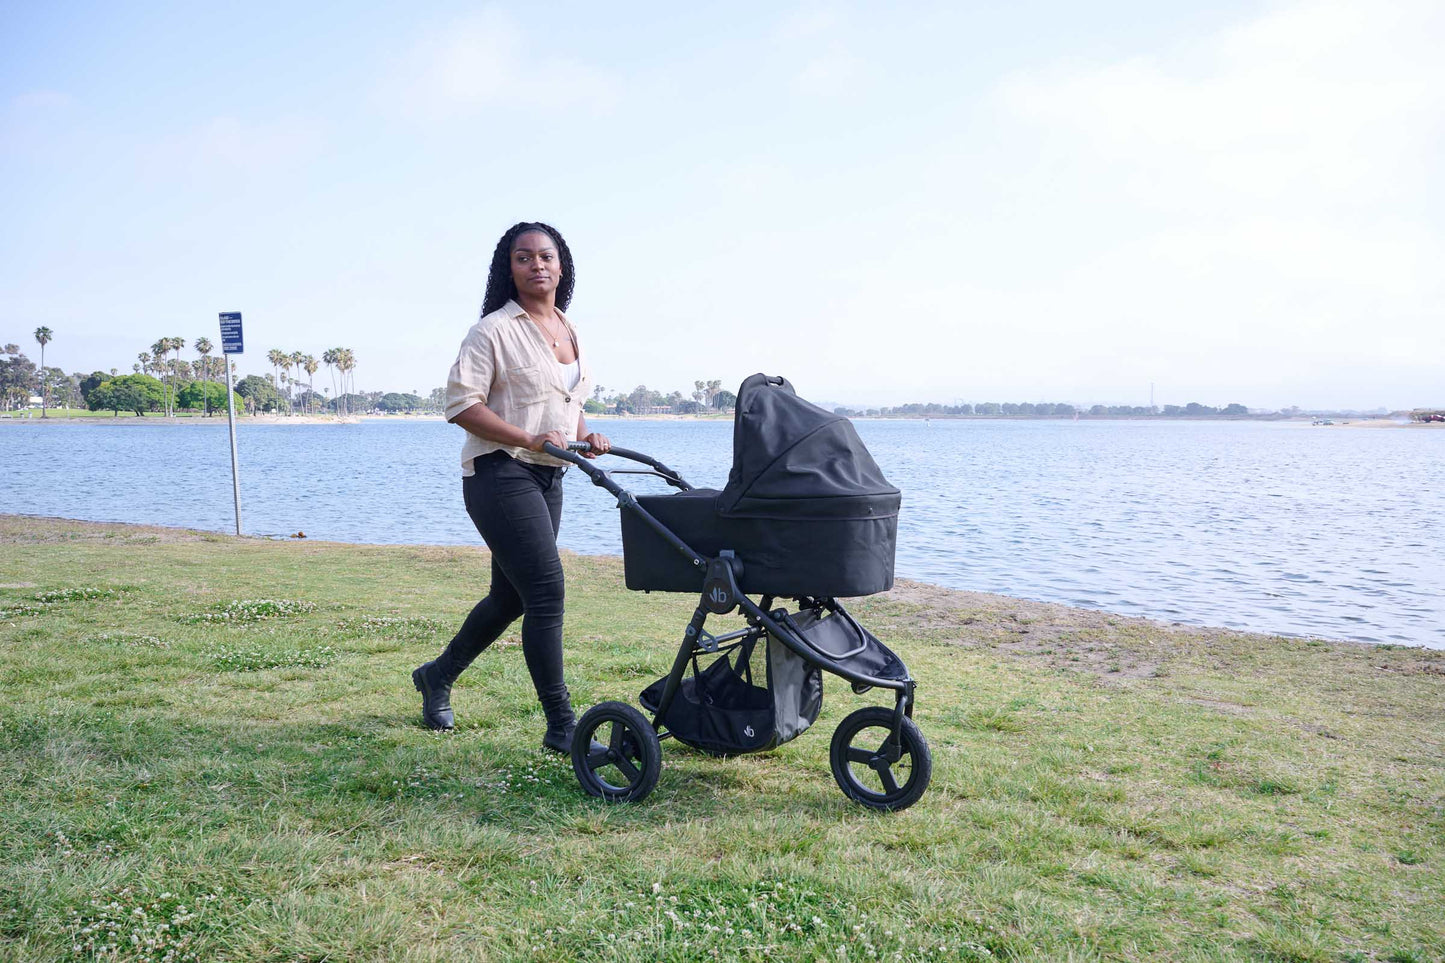 
                  
                    Bumbleride Single Bassinet in Black attached on Bumbleride Indie All Terrain Stroller in Black on grass near water with mother pushing from behind stroller. Global
                  
                